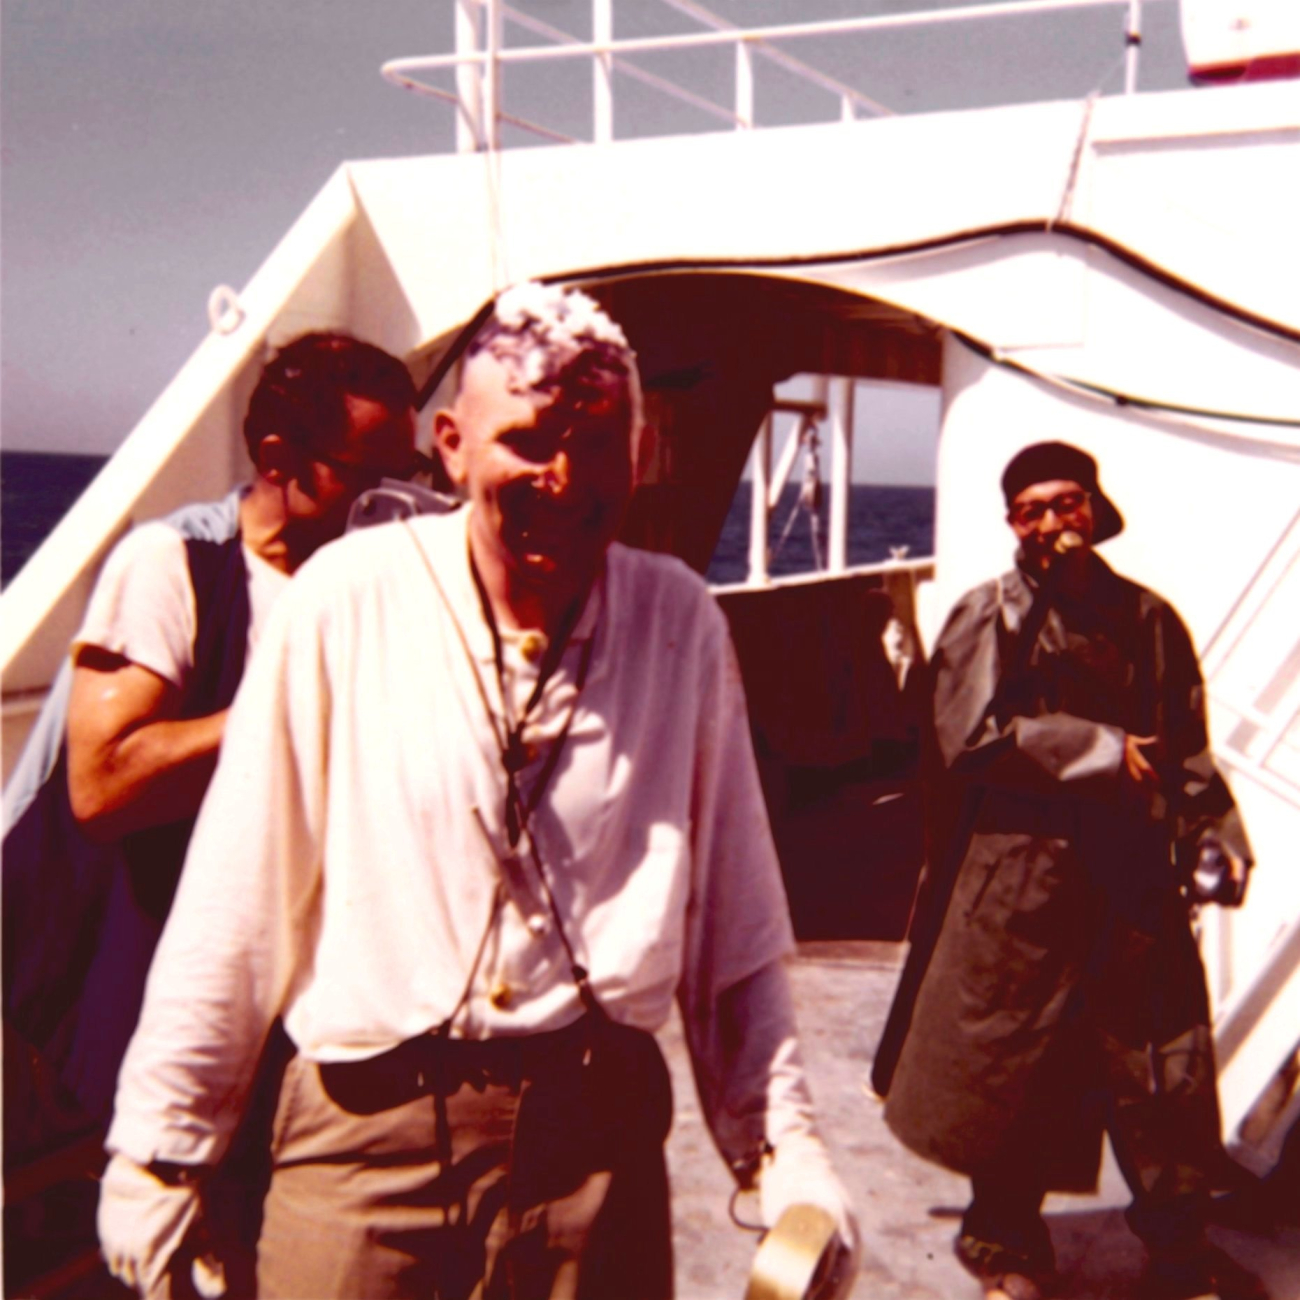 Commander Hubert Keith, Executive Officer of the ESSA Ship DISCOVERER, after atrip to the royal barber during Equator crossing ceremonies